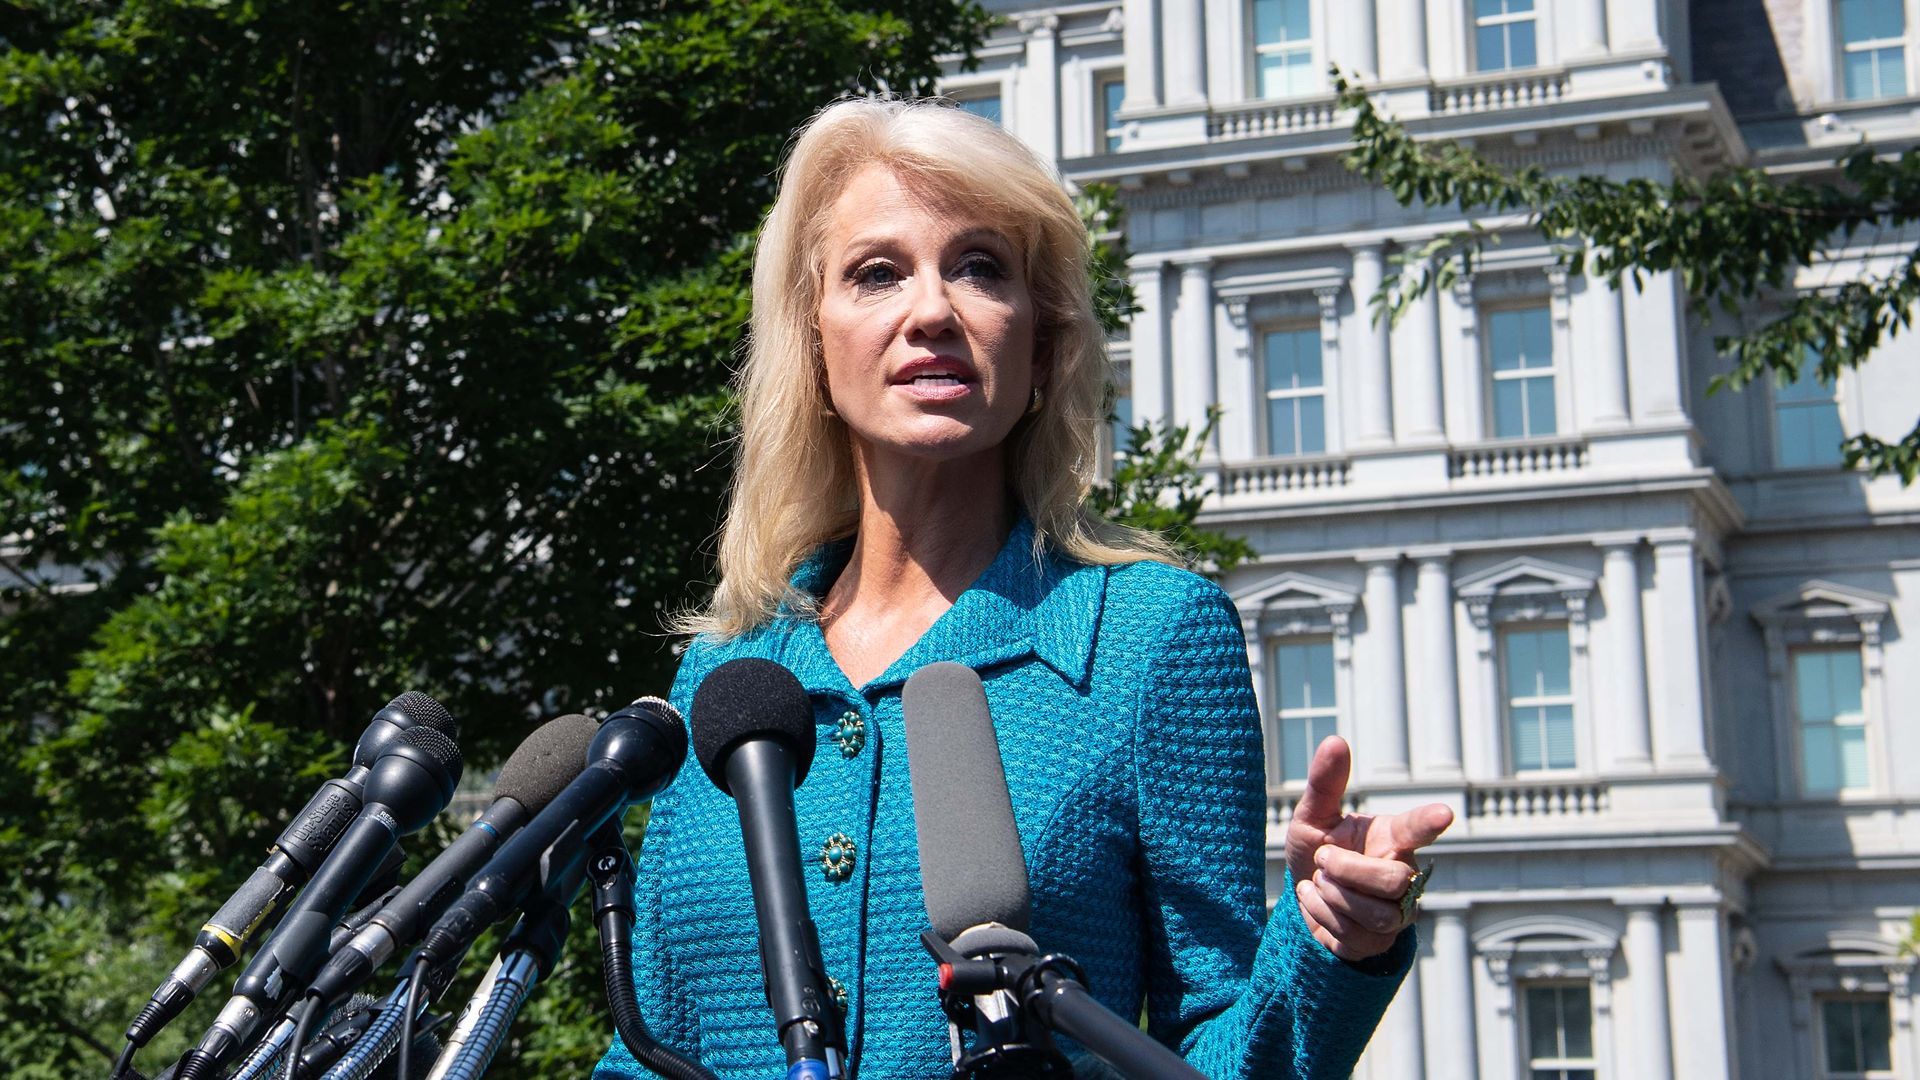  White House counselor Kellyanne Conway speaks to the press at the White House in Washington, DC